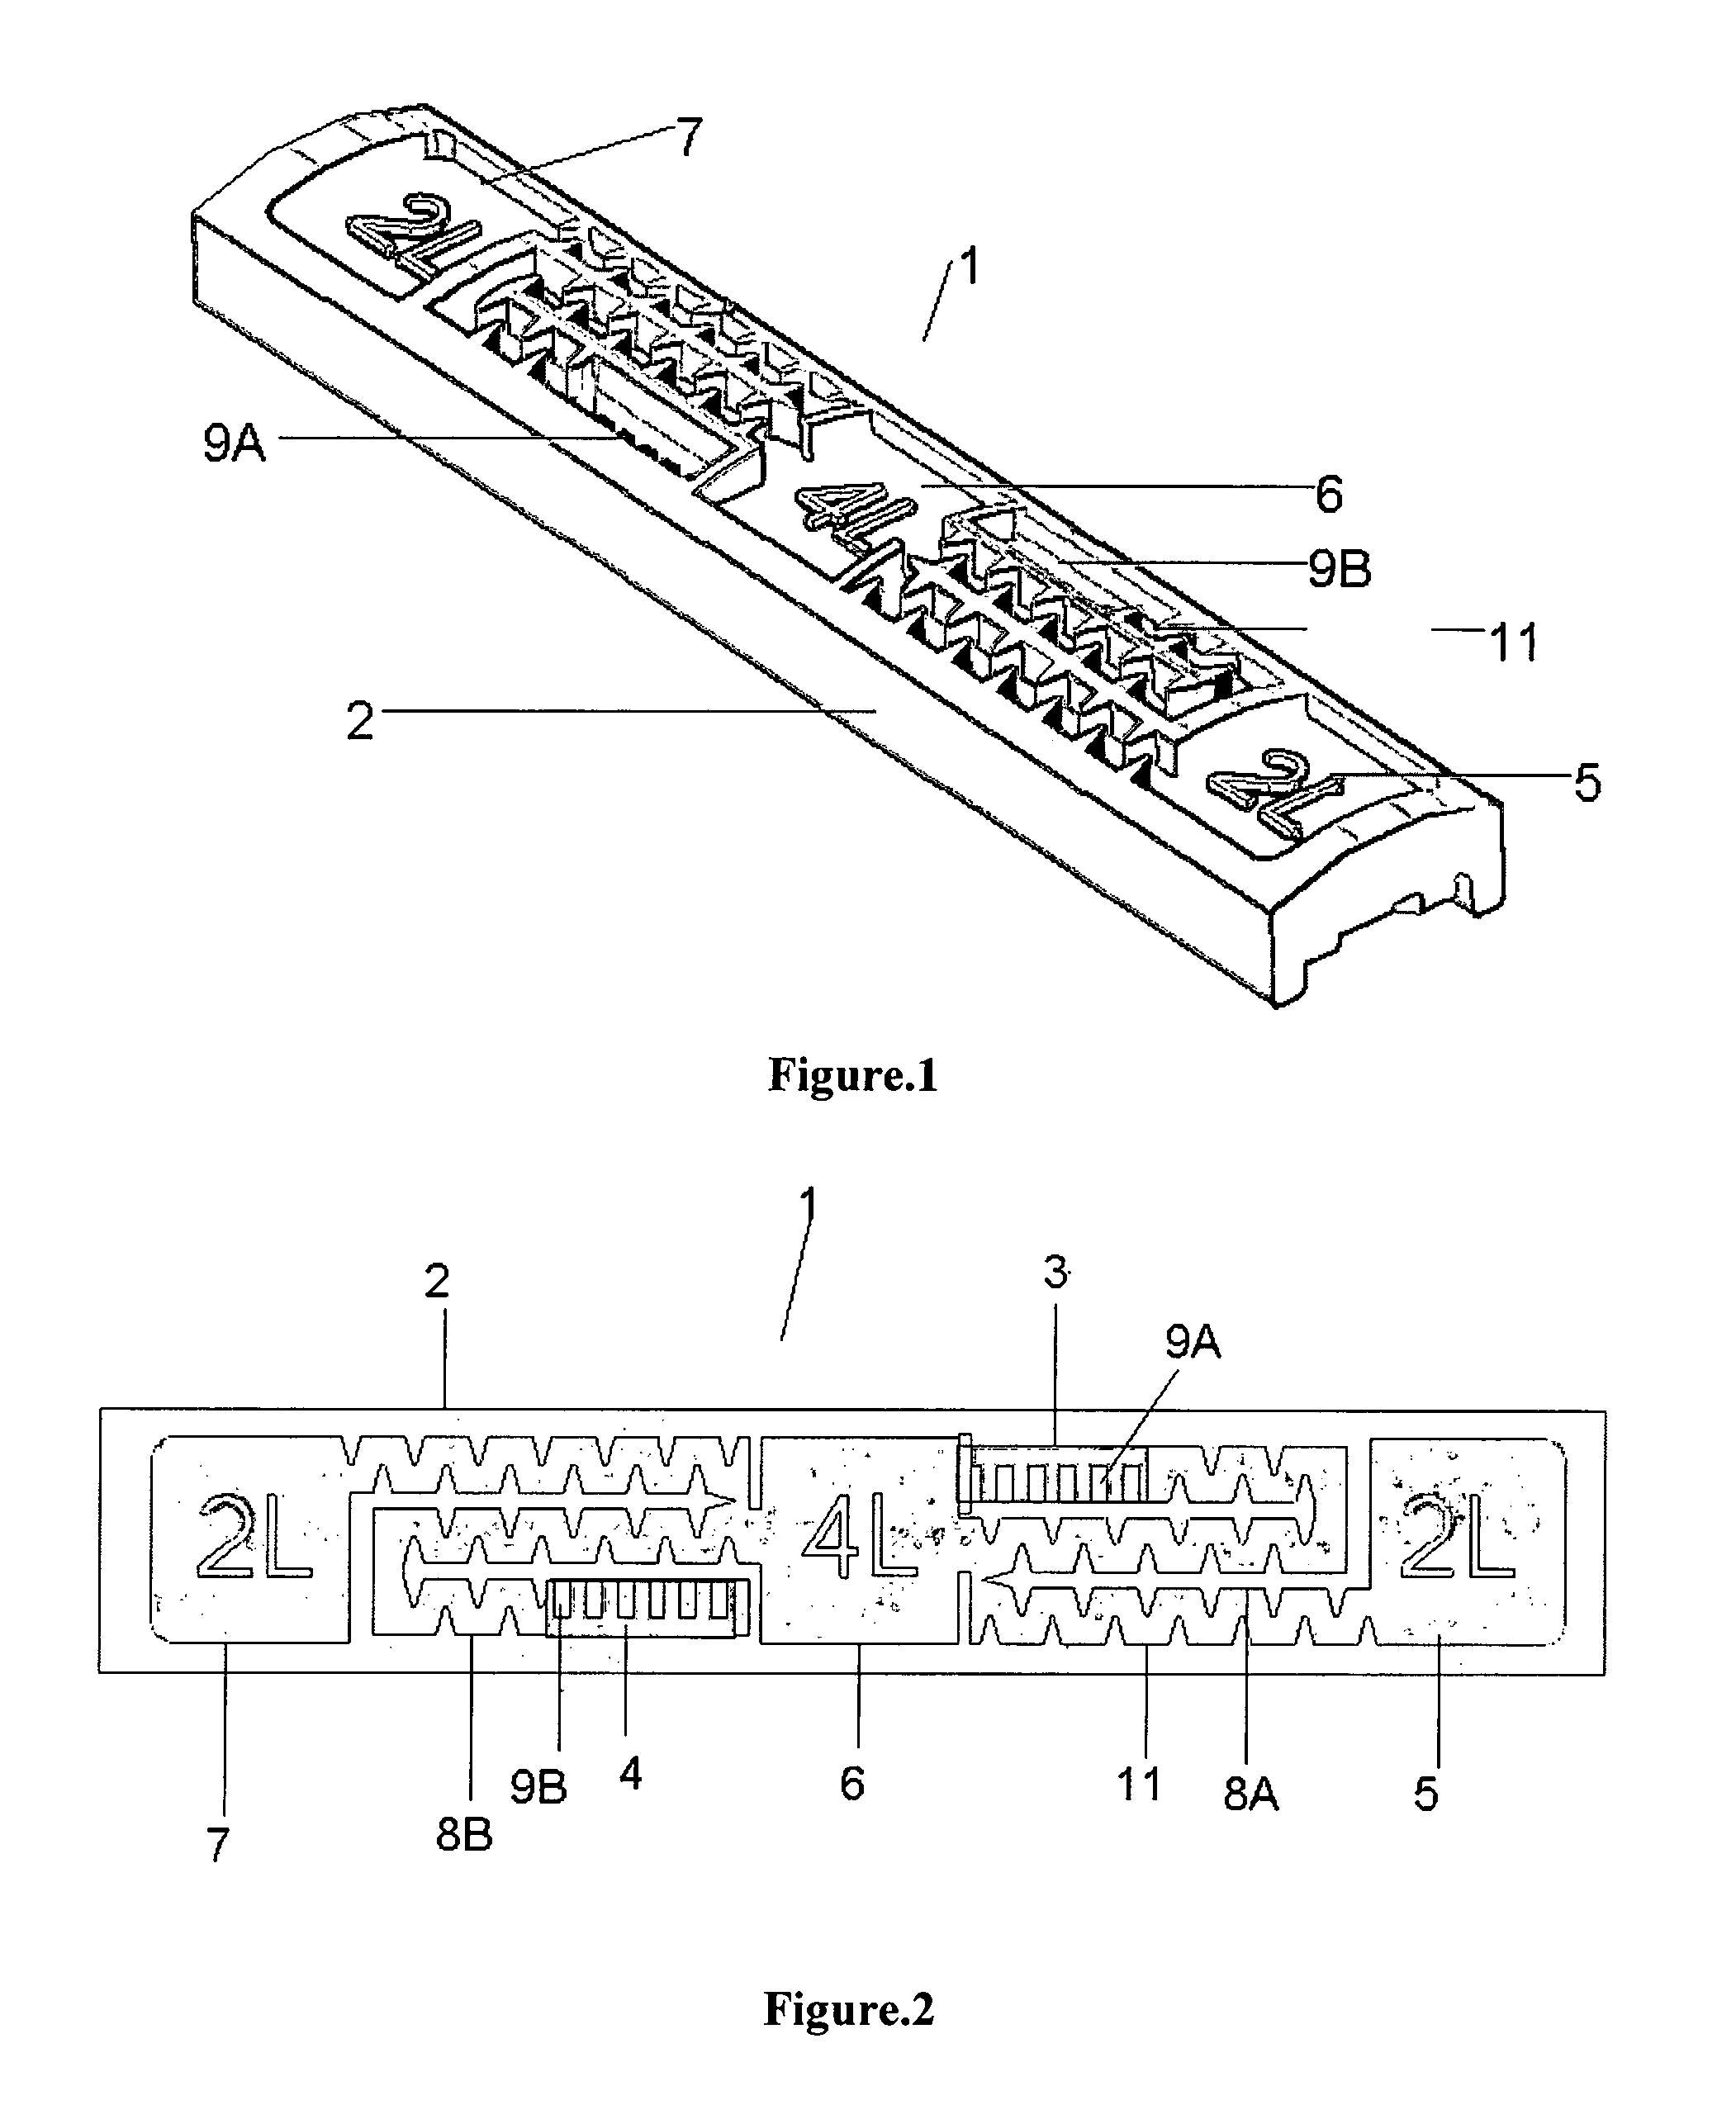 Non pressure compensated drip irrigation emitter with multiflow facility